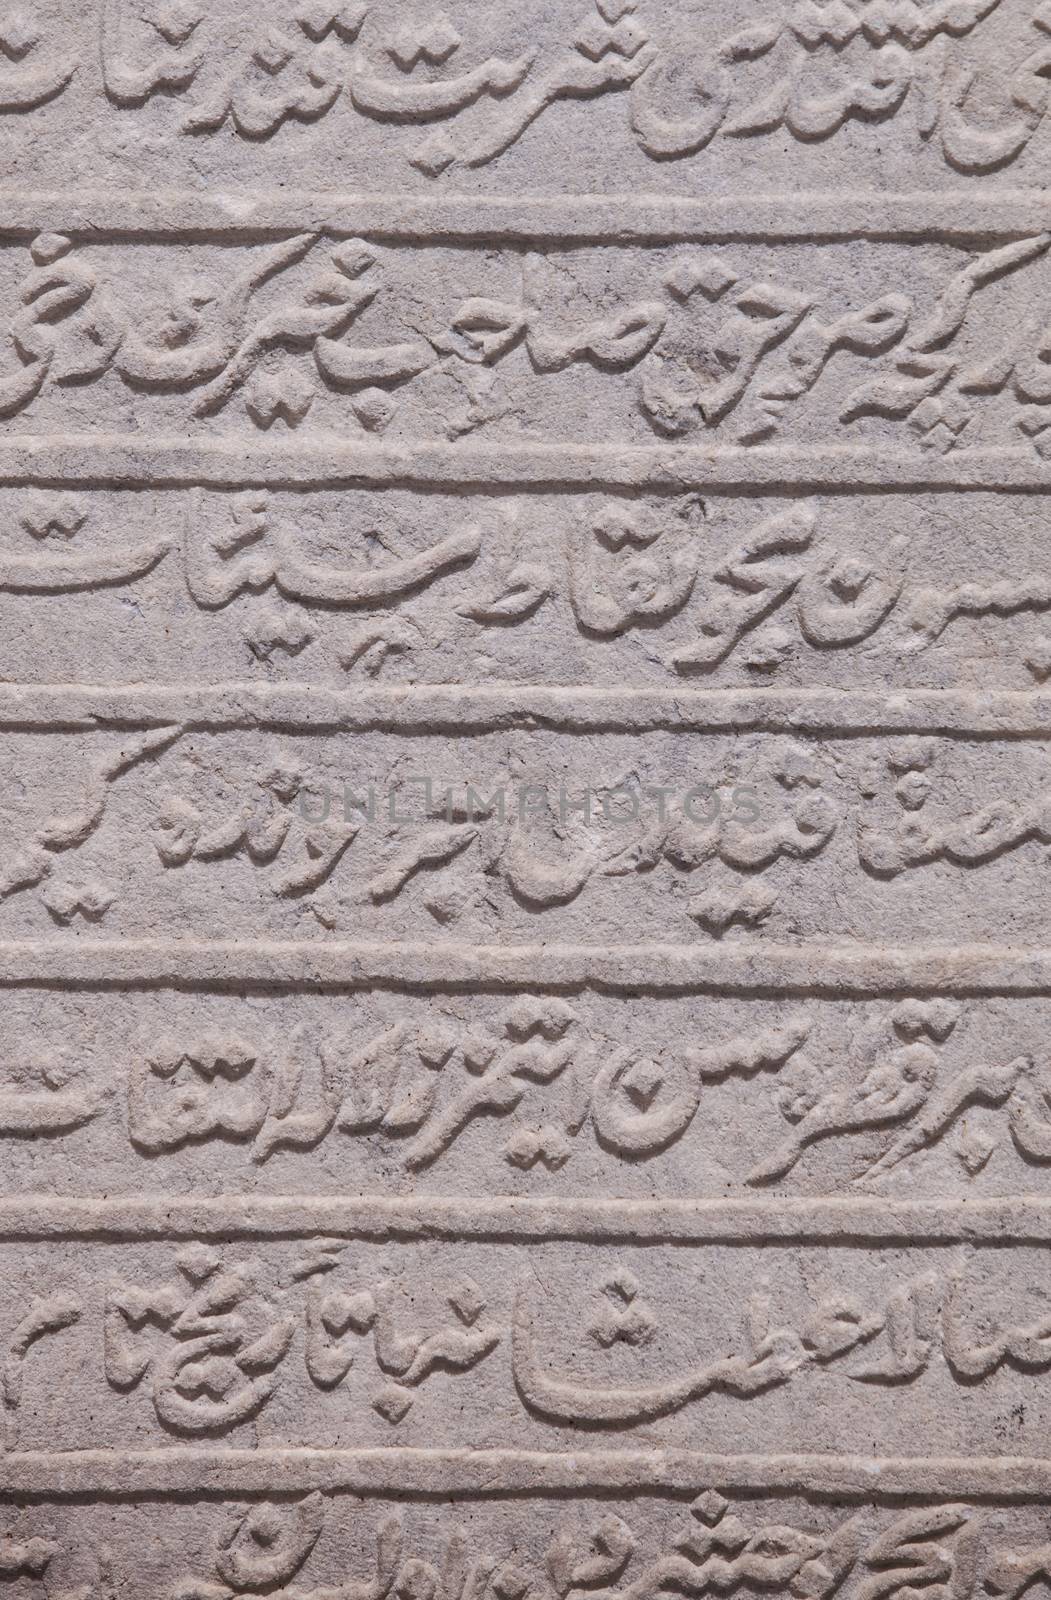 Inscription at the Ruins of Perga in Turkey by Creatista